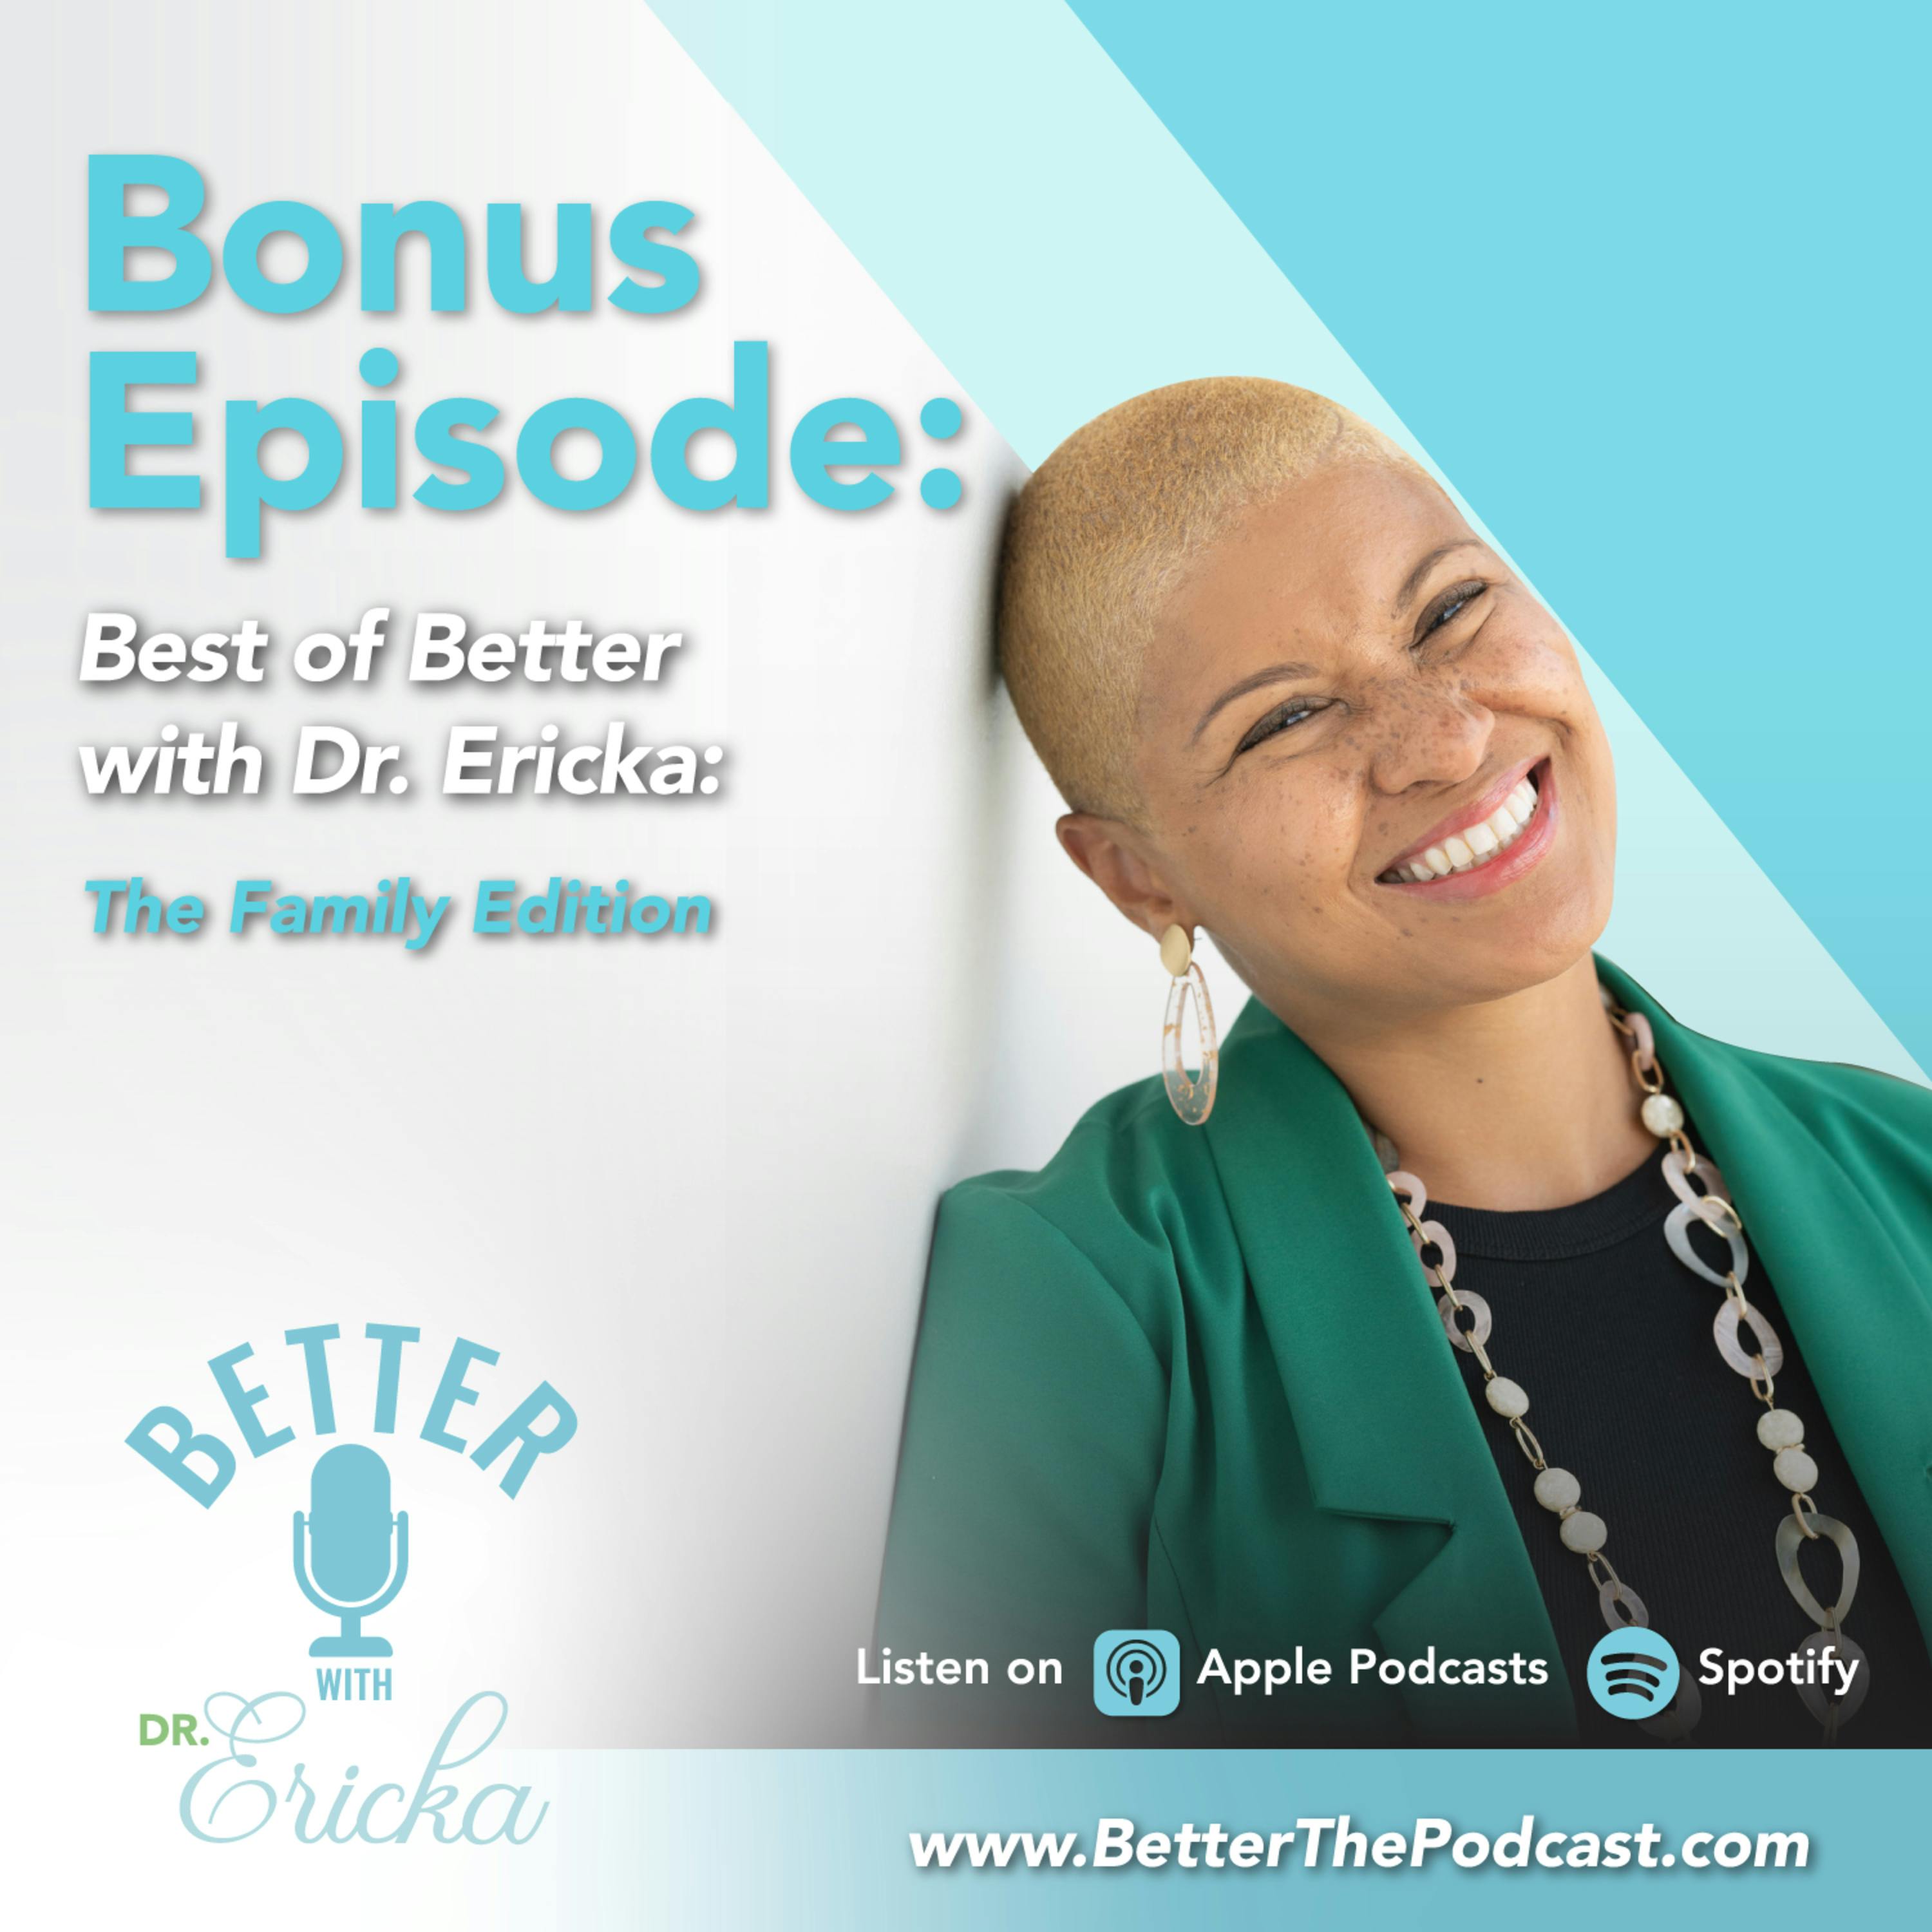 Bonus: Best of Better with Dr. Ericka: Family Edition